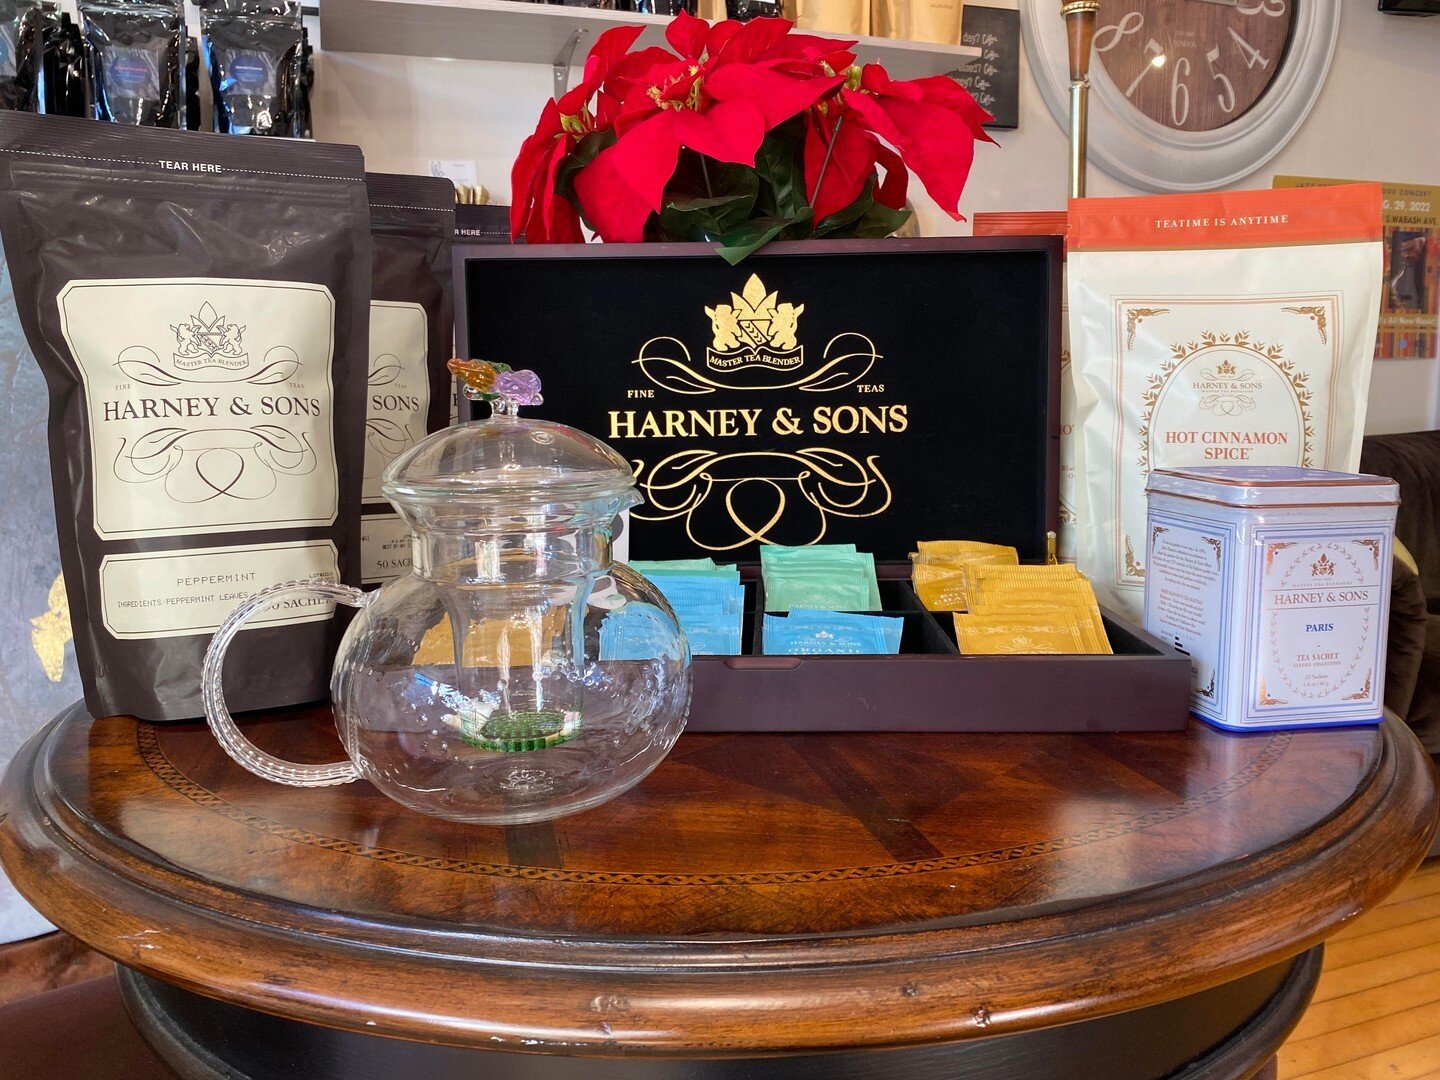 Check out our delicious holiday tea options to keep yourself warm this season

You can find everything on our online store grndcoffeehouse.com

#grnd #tea #holiday #Christmas #oakparkartsdistrict #harrisonstreetartsdistrict #shop #gifts #coffee #oakp